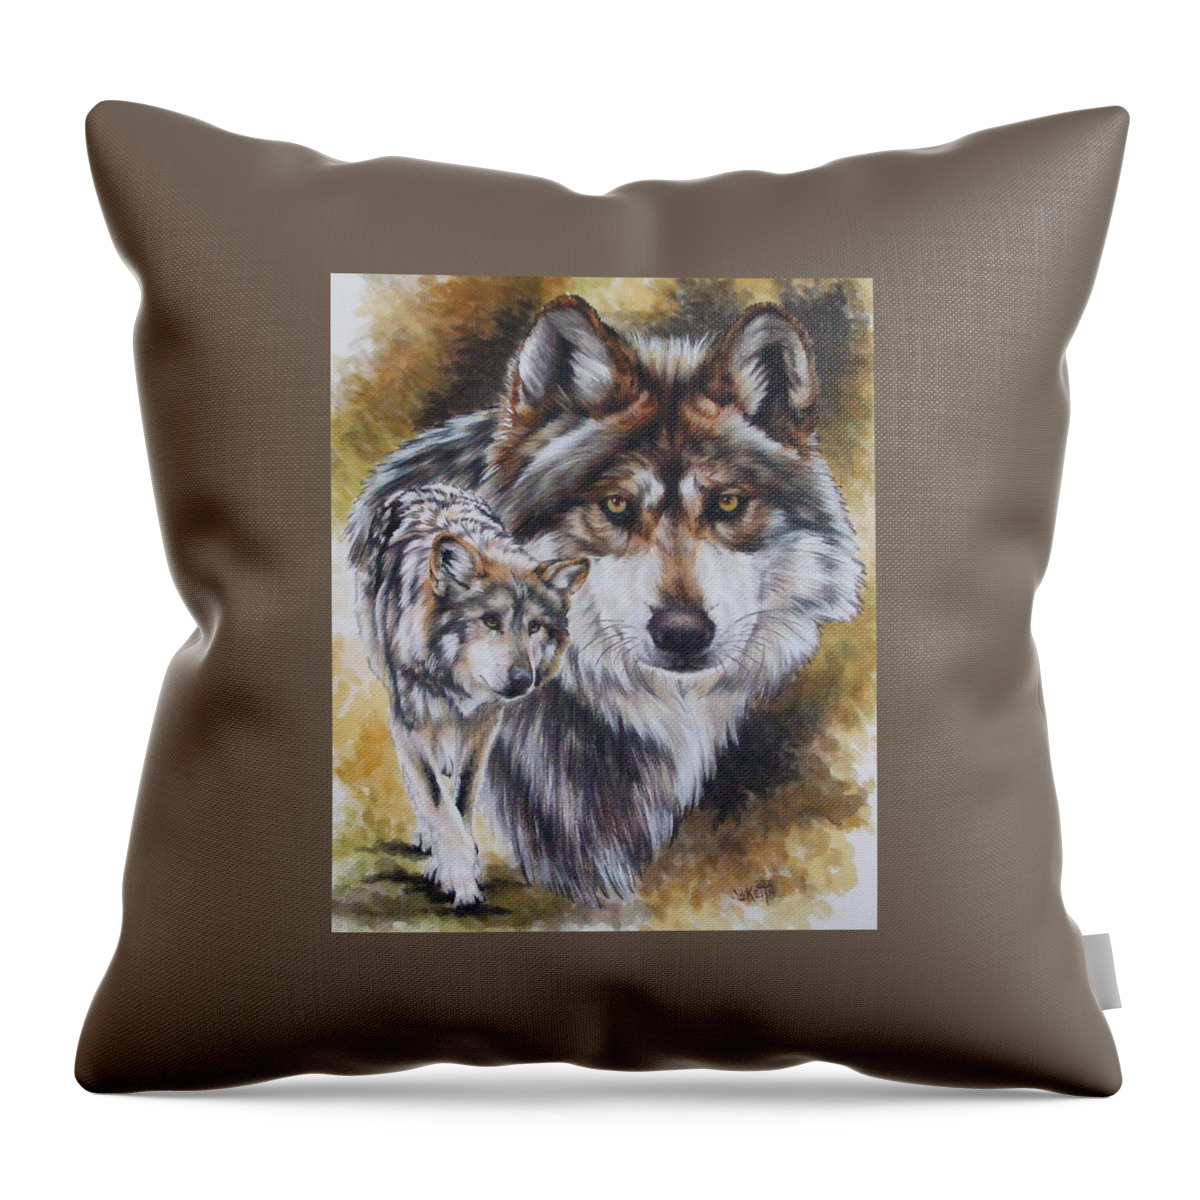 Wildlife Throw Pillow featuring the mixed media Callidity by Barbara Keith